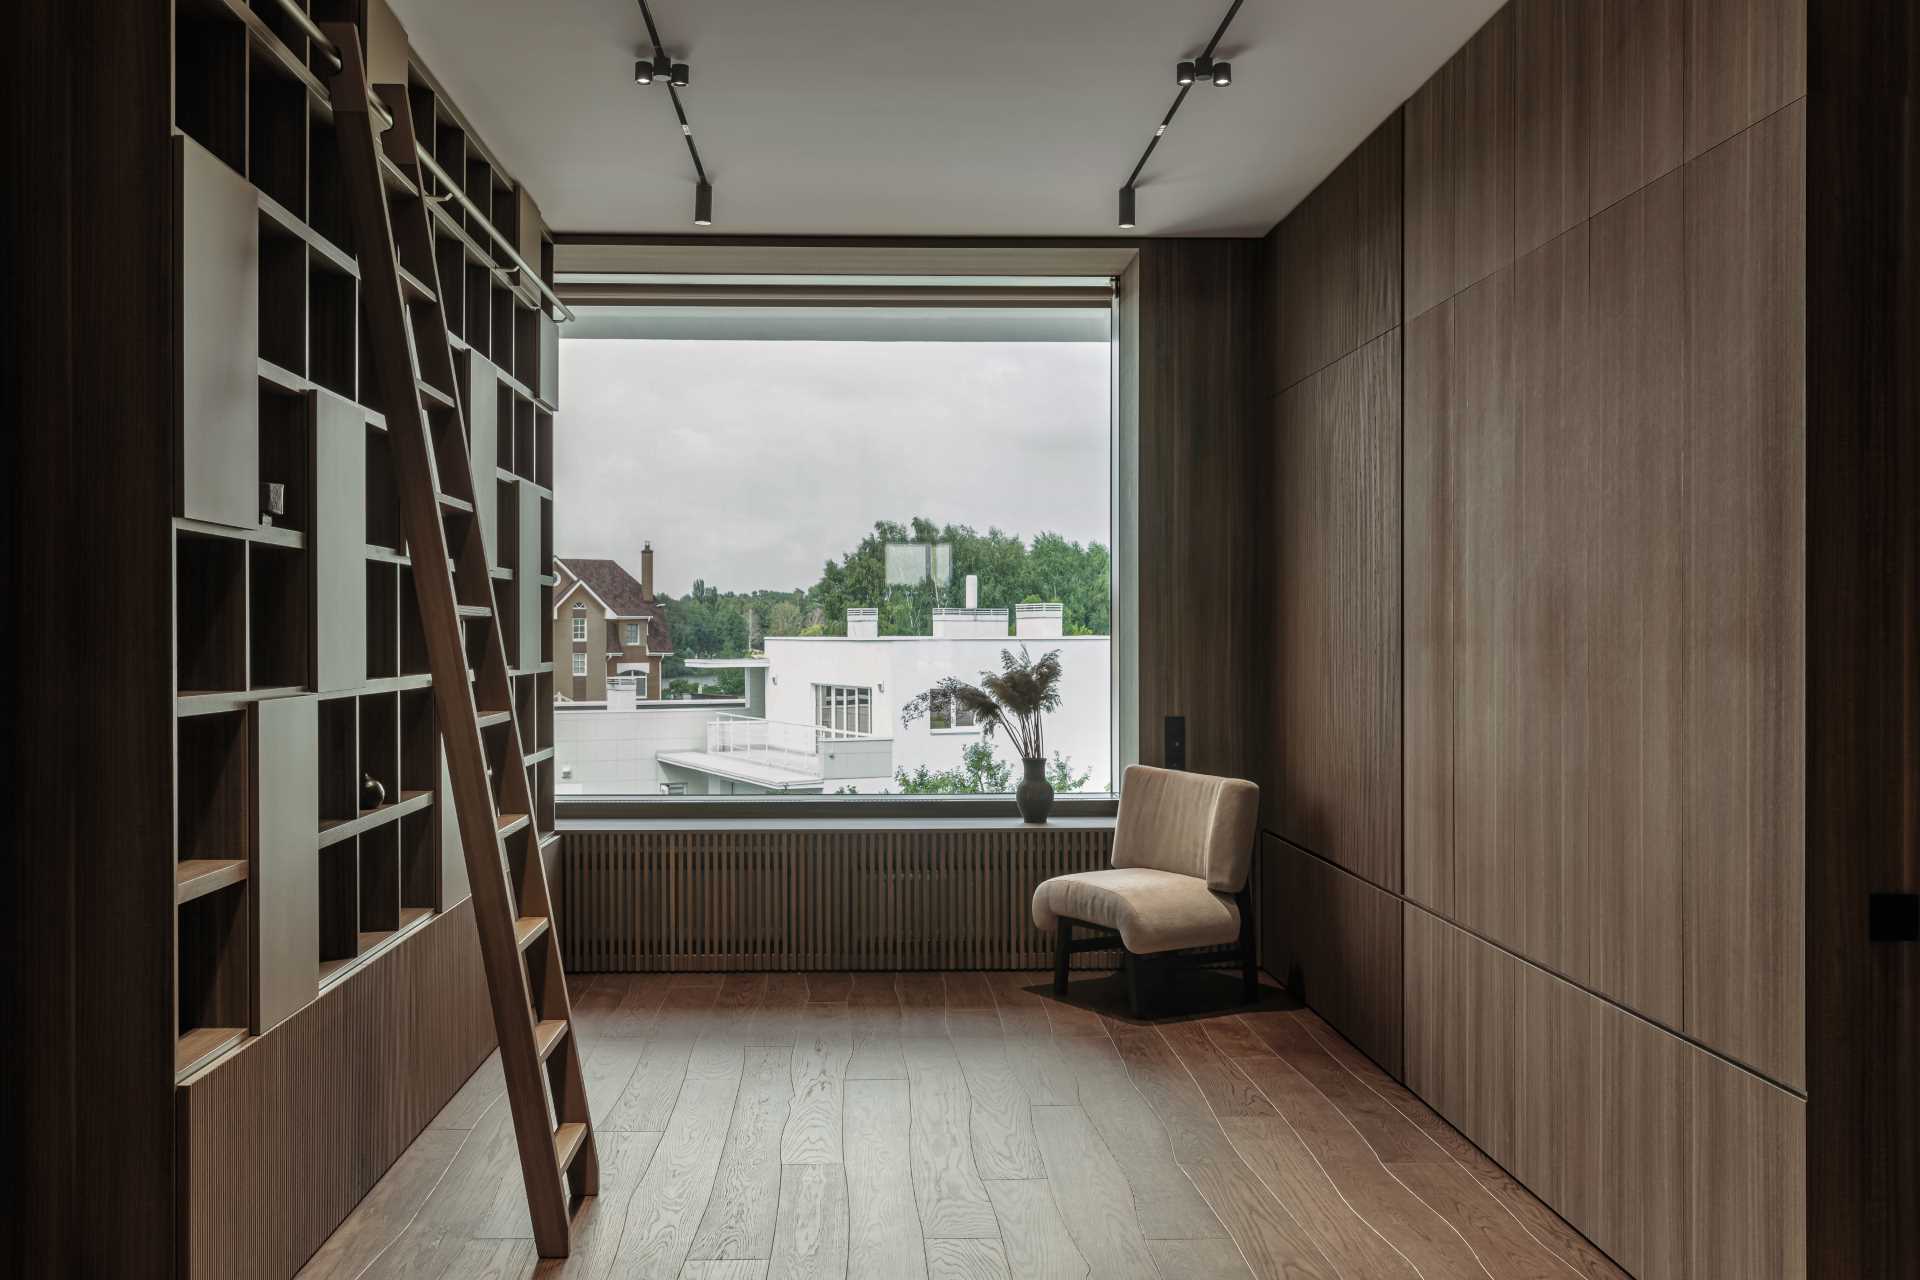 A library with a large window looking out onto the neighborhood, while wood walls, shelving, and flooring add warmth to the space.